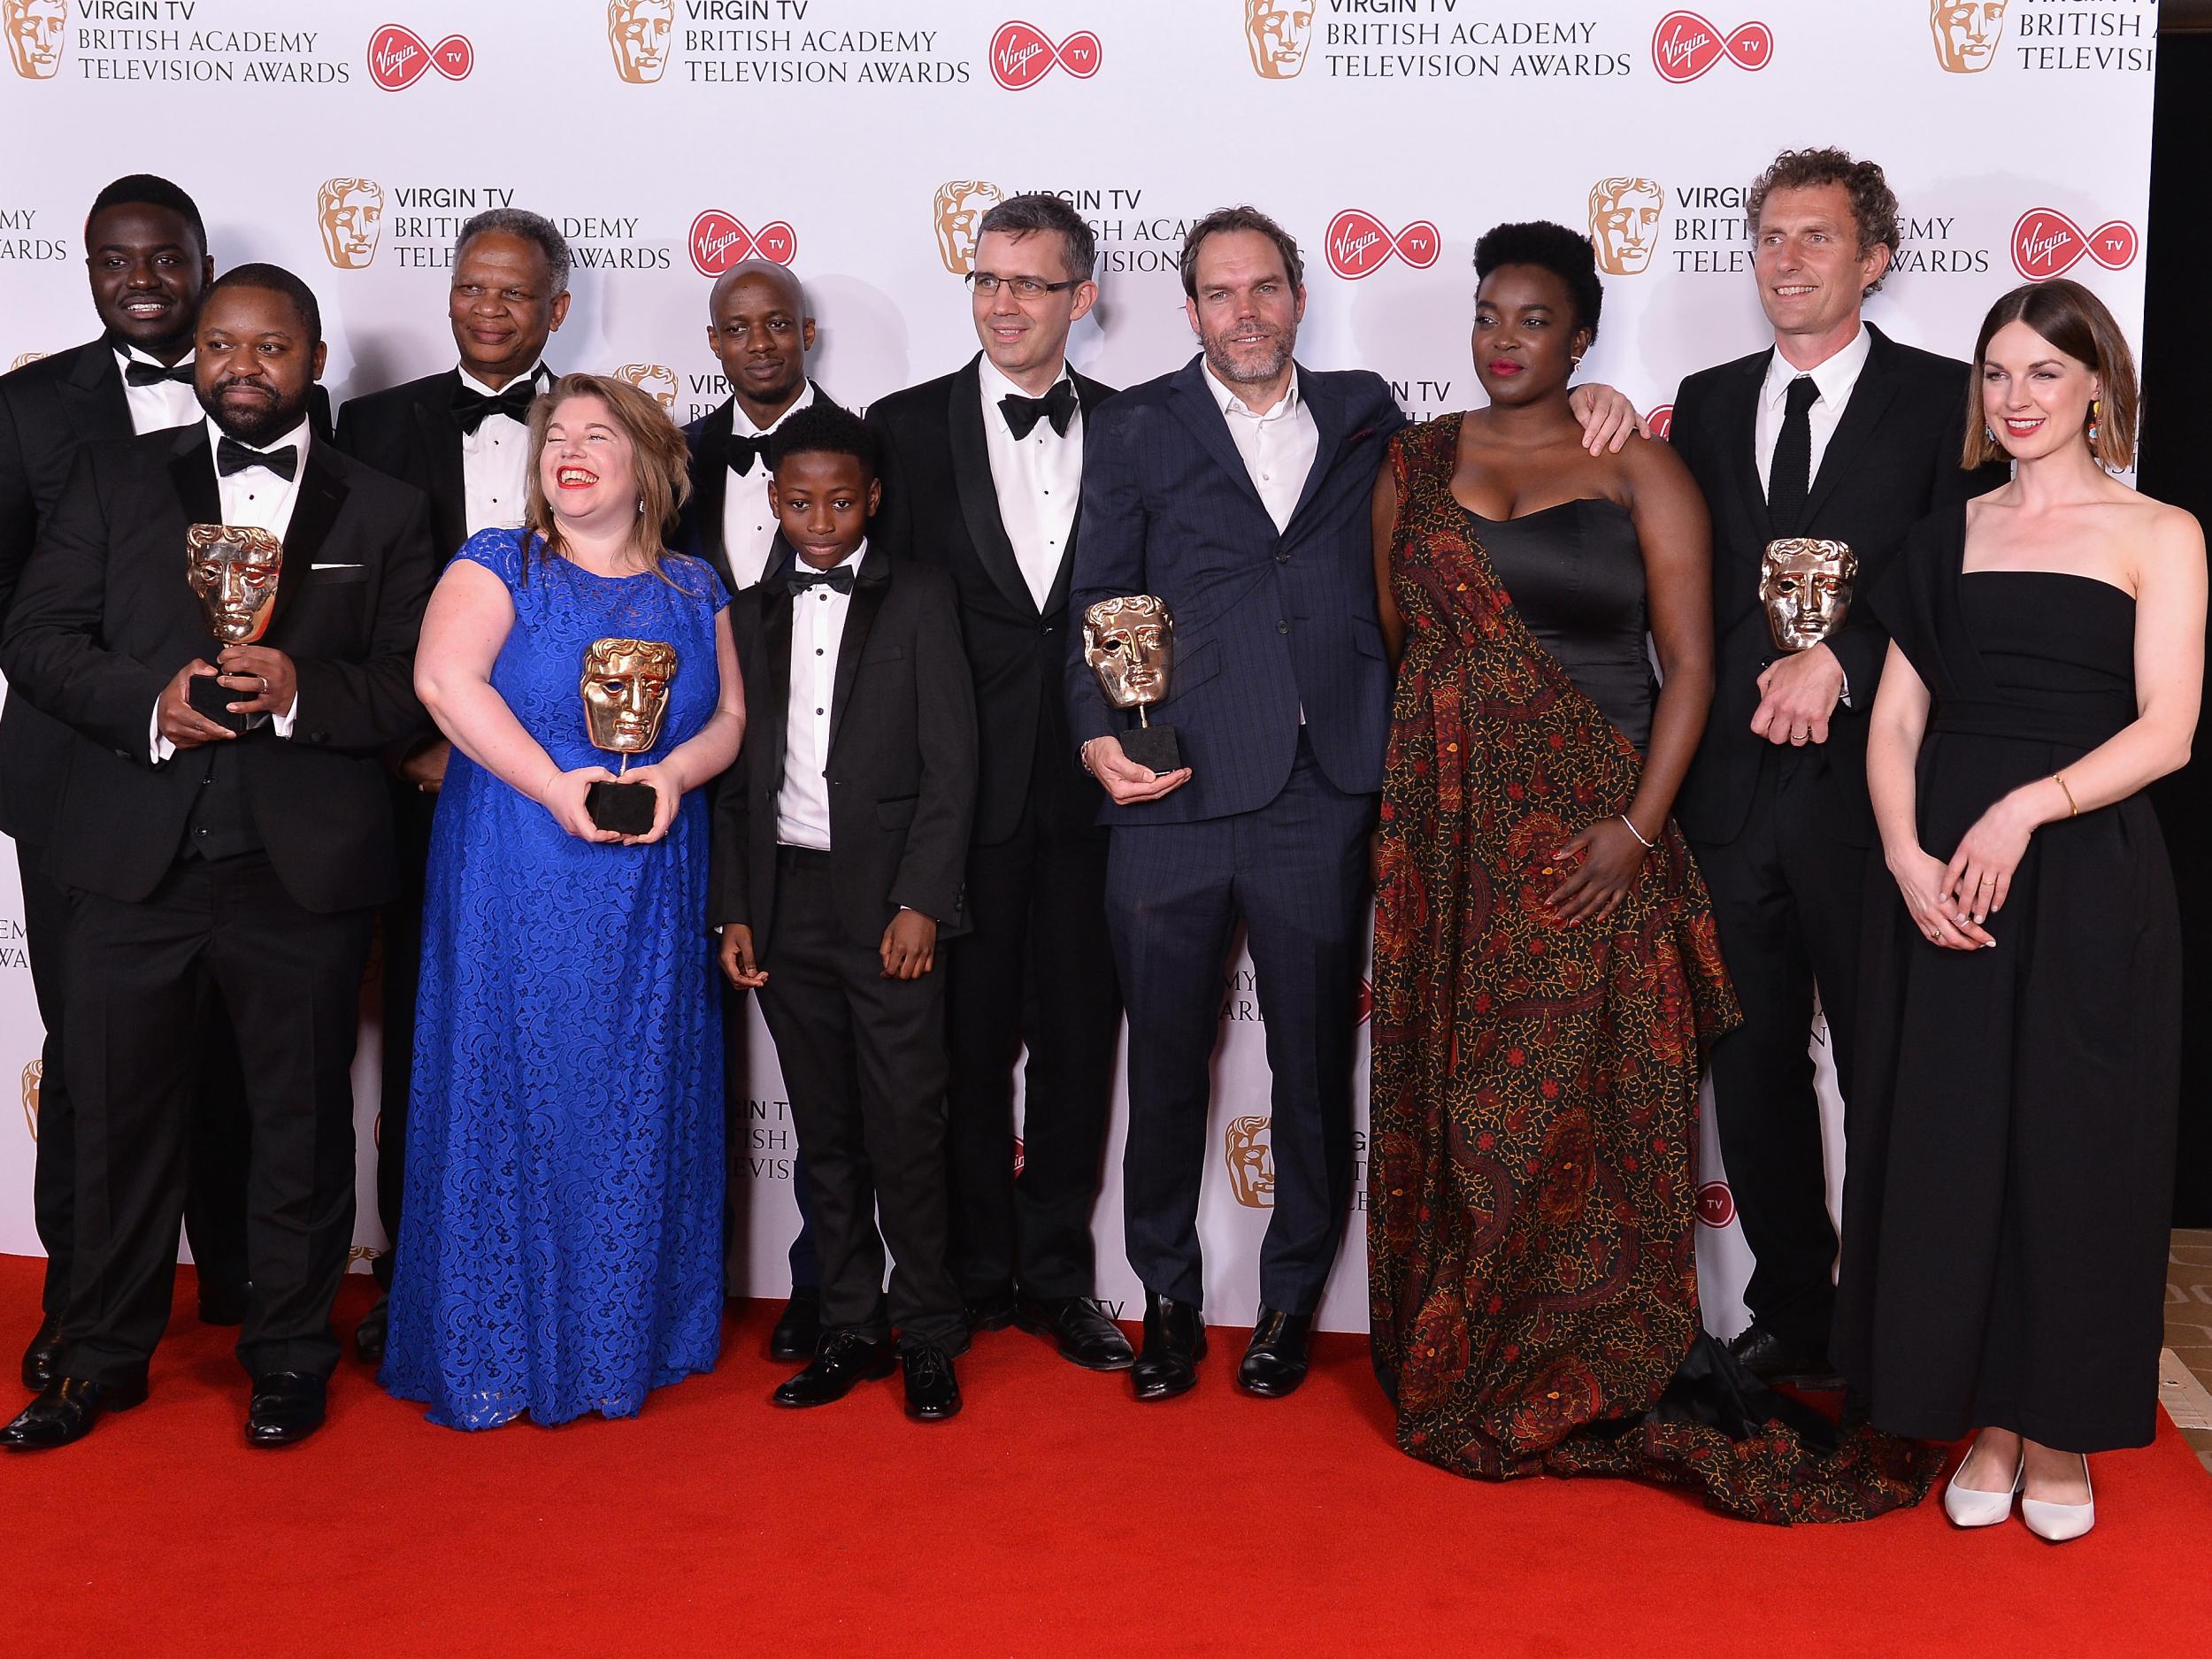 Winners of the Single Drama award for Damilola, Our Loved Boy and presenter Jessica Raine